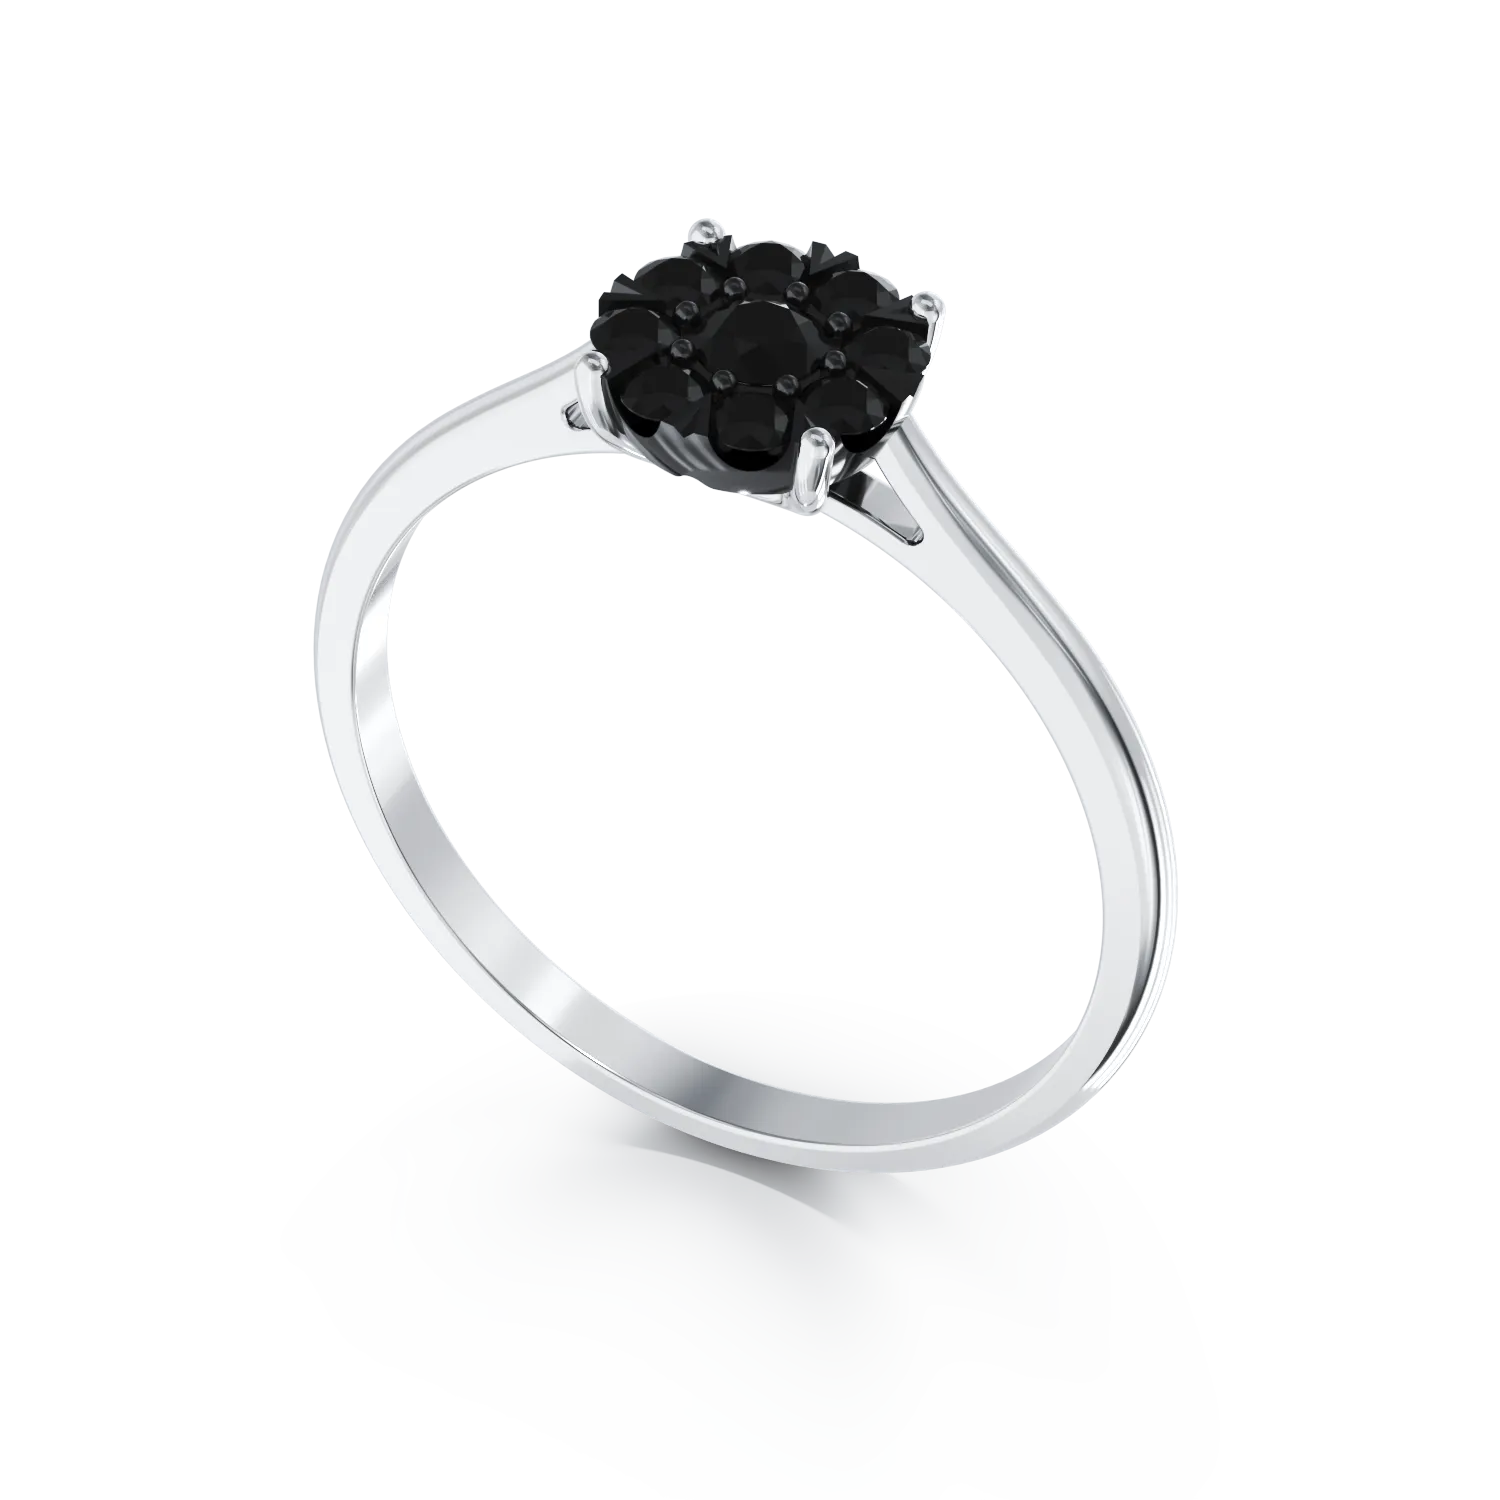 18K white gold engagement ring with 0.168ct black diamonds